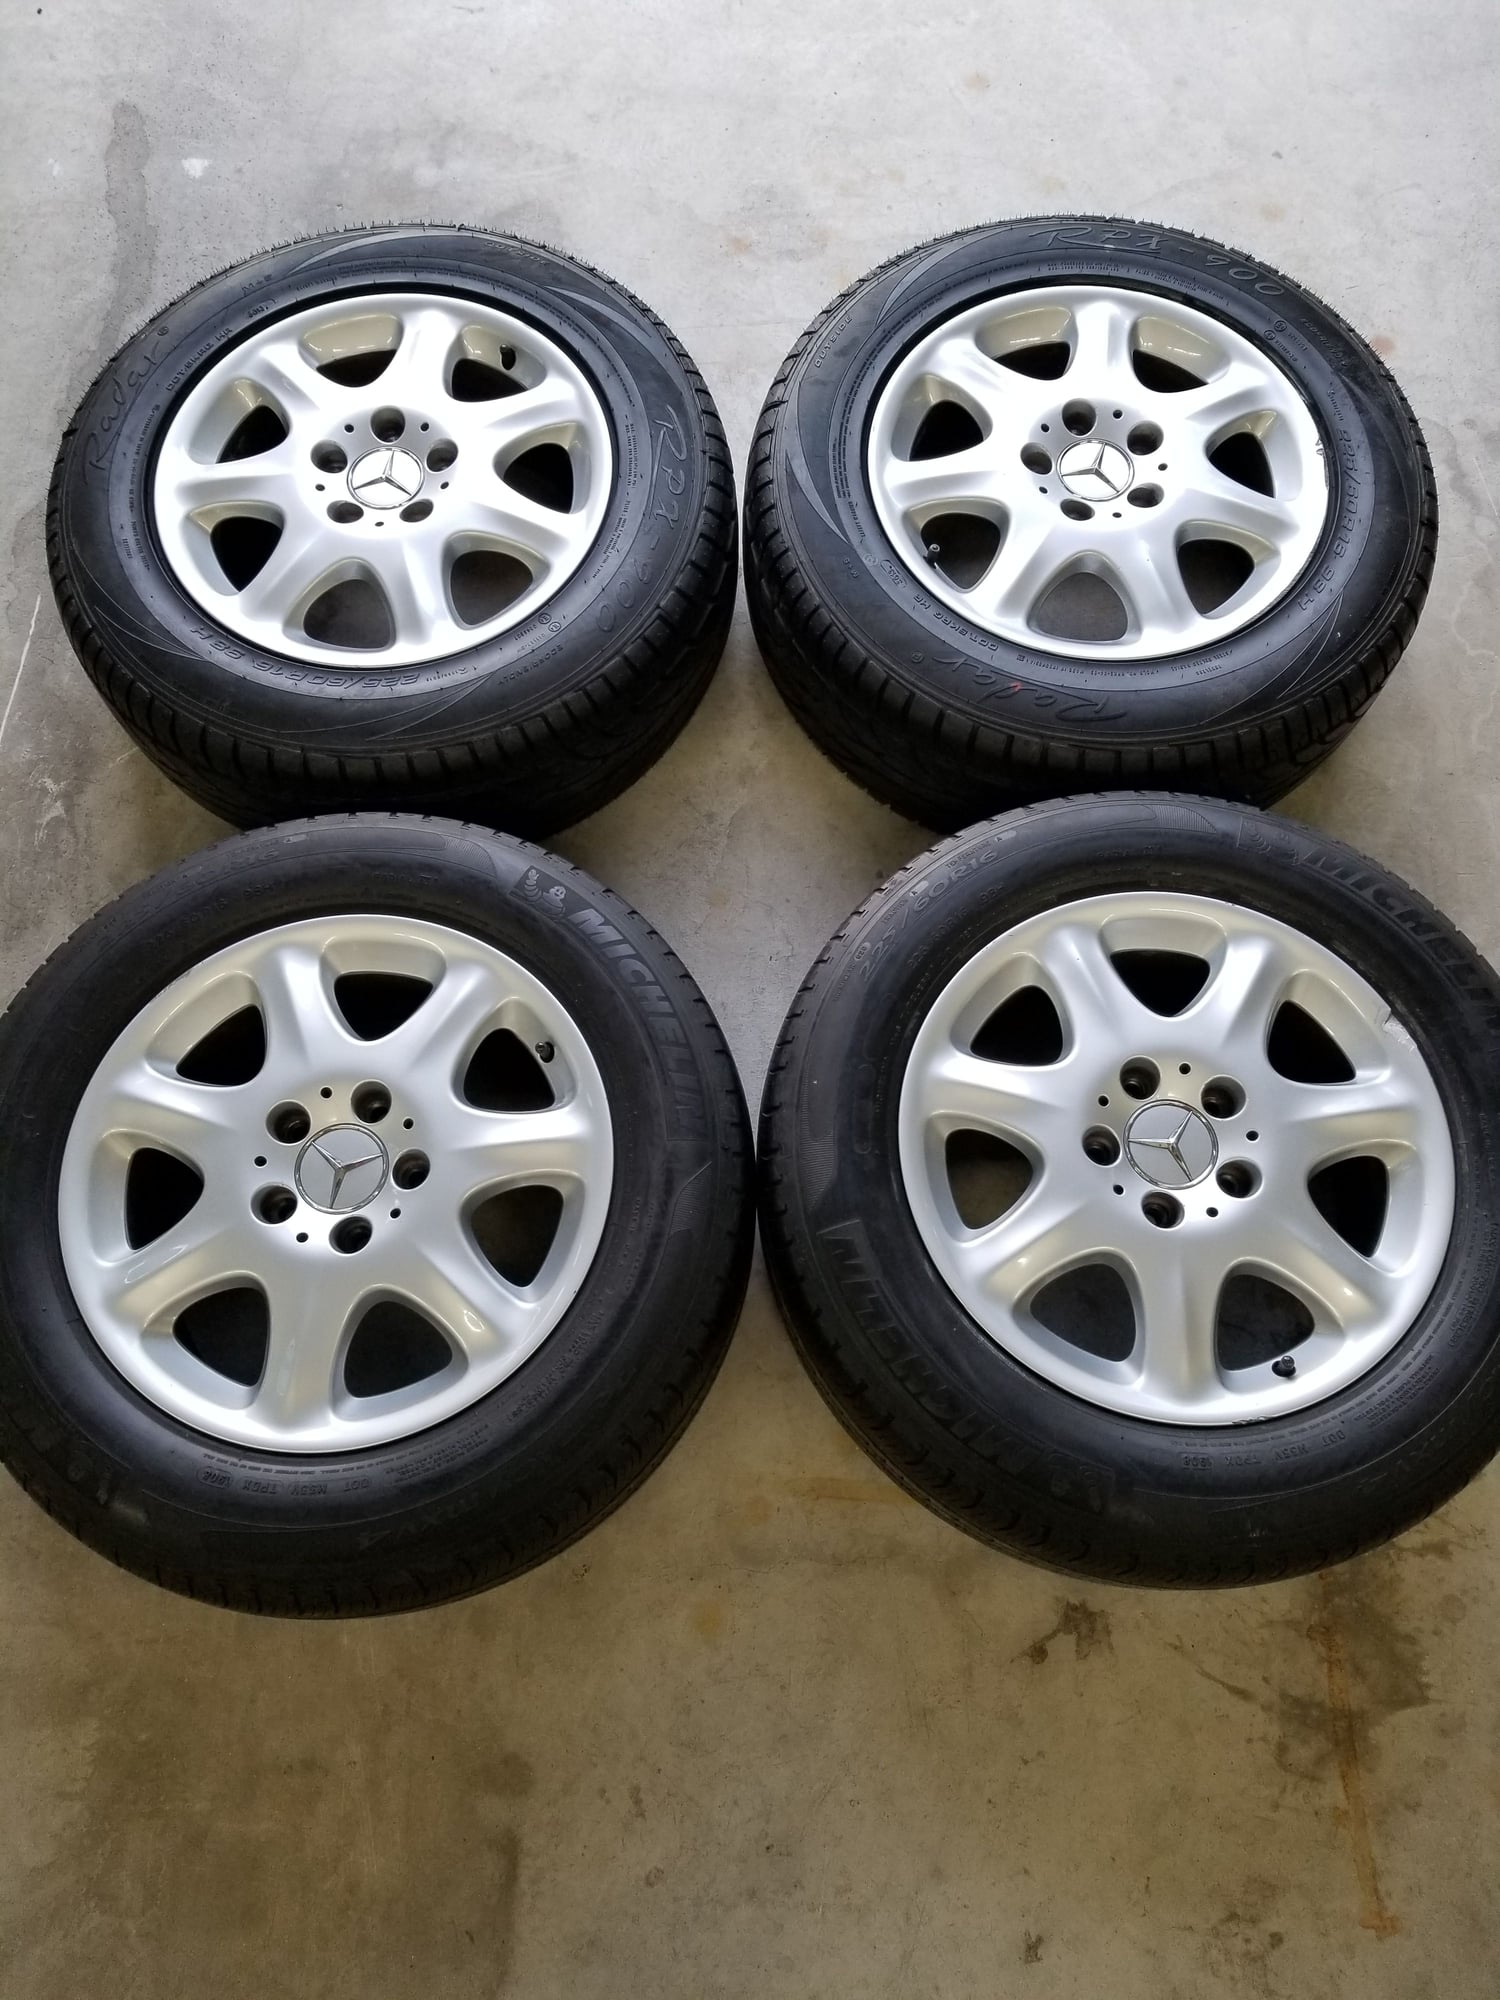 Wheels and Tires/Axles - OEM 2000-2002 S430/S500 wheels with tires - Used - 0  All Models - New Fairfield, CT 06812, United States